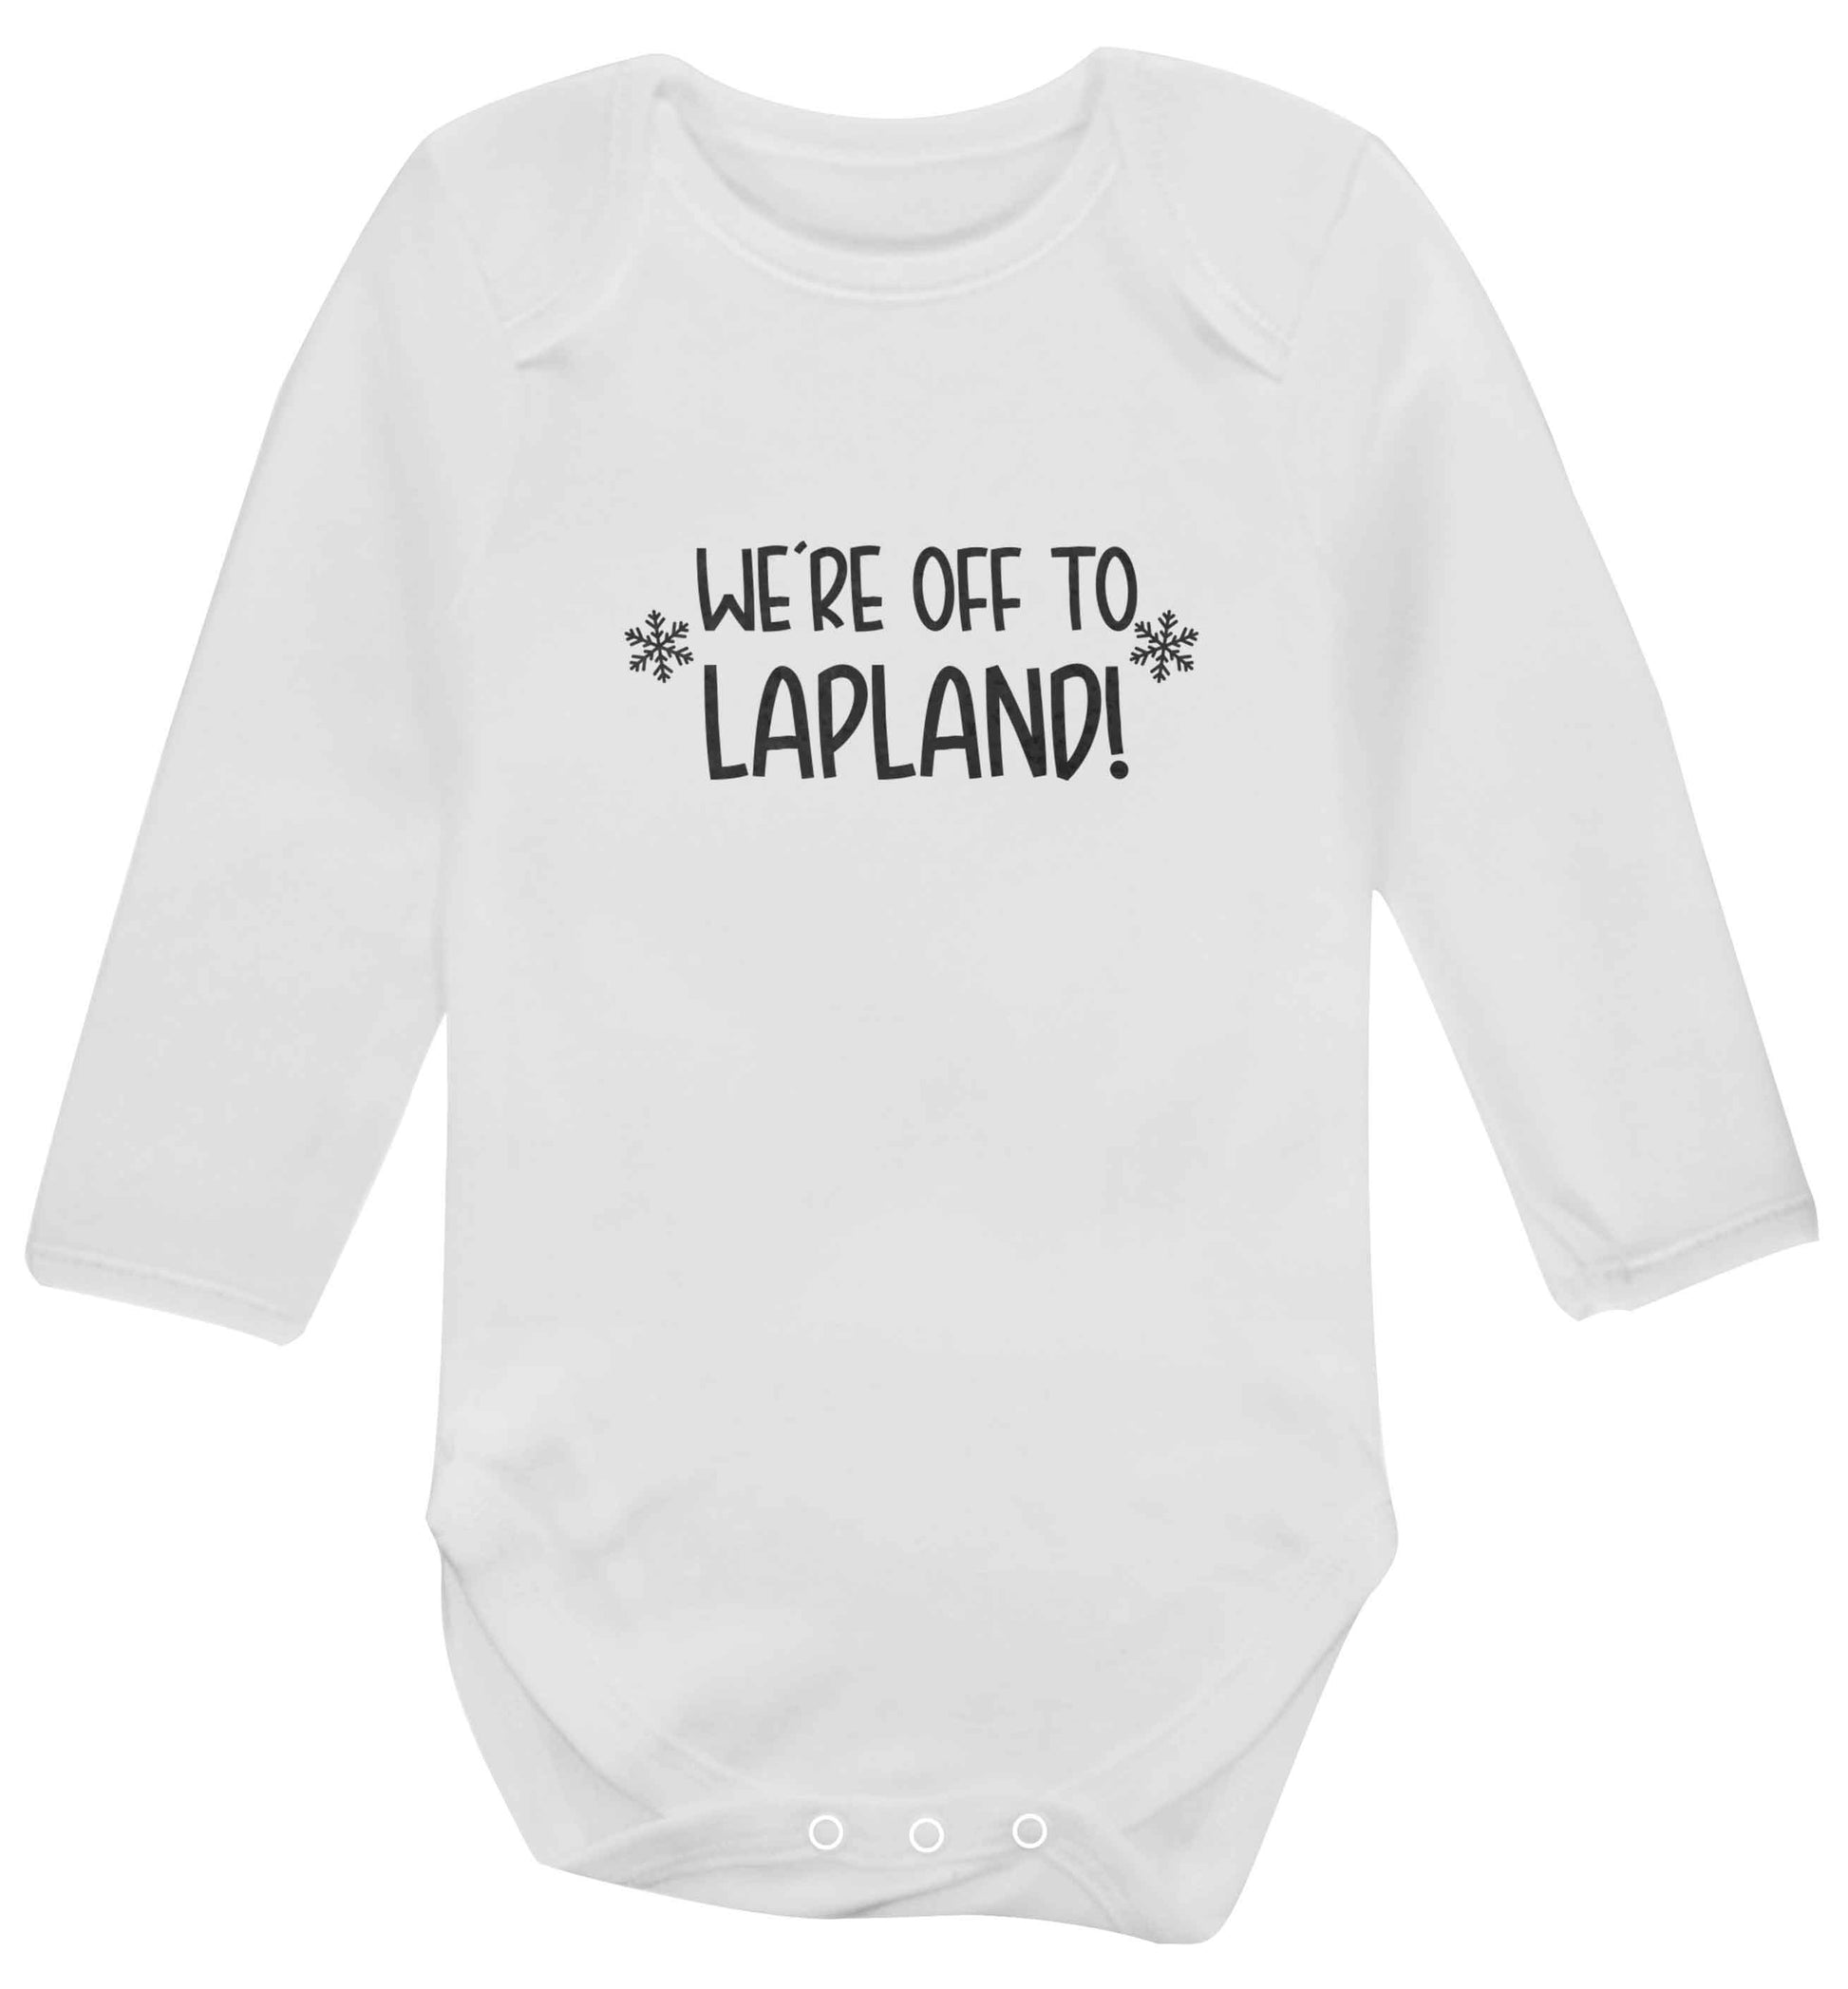 We're off to Lapland baby vest long sleeved white 6-12 months